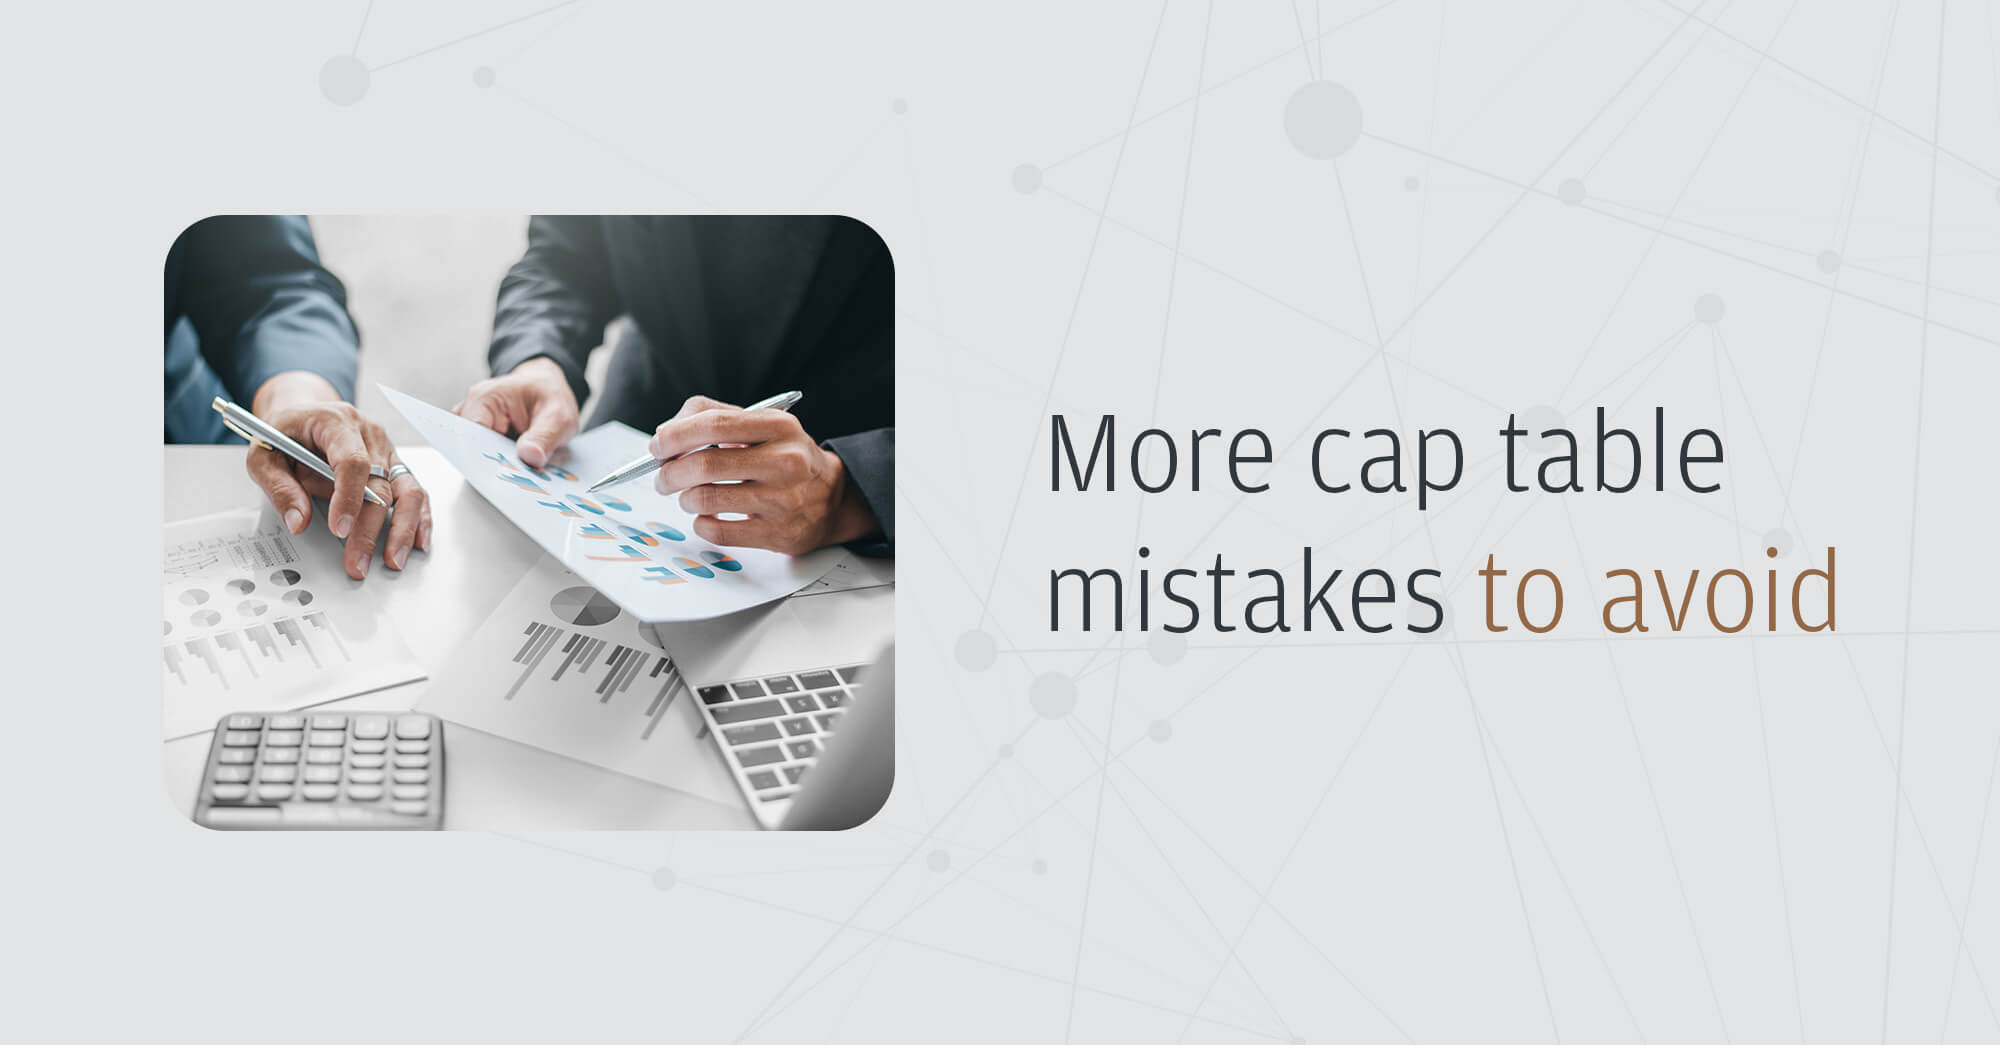 More common cap table mistakes